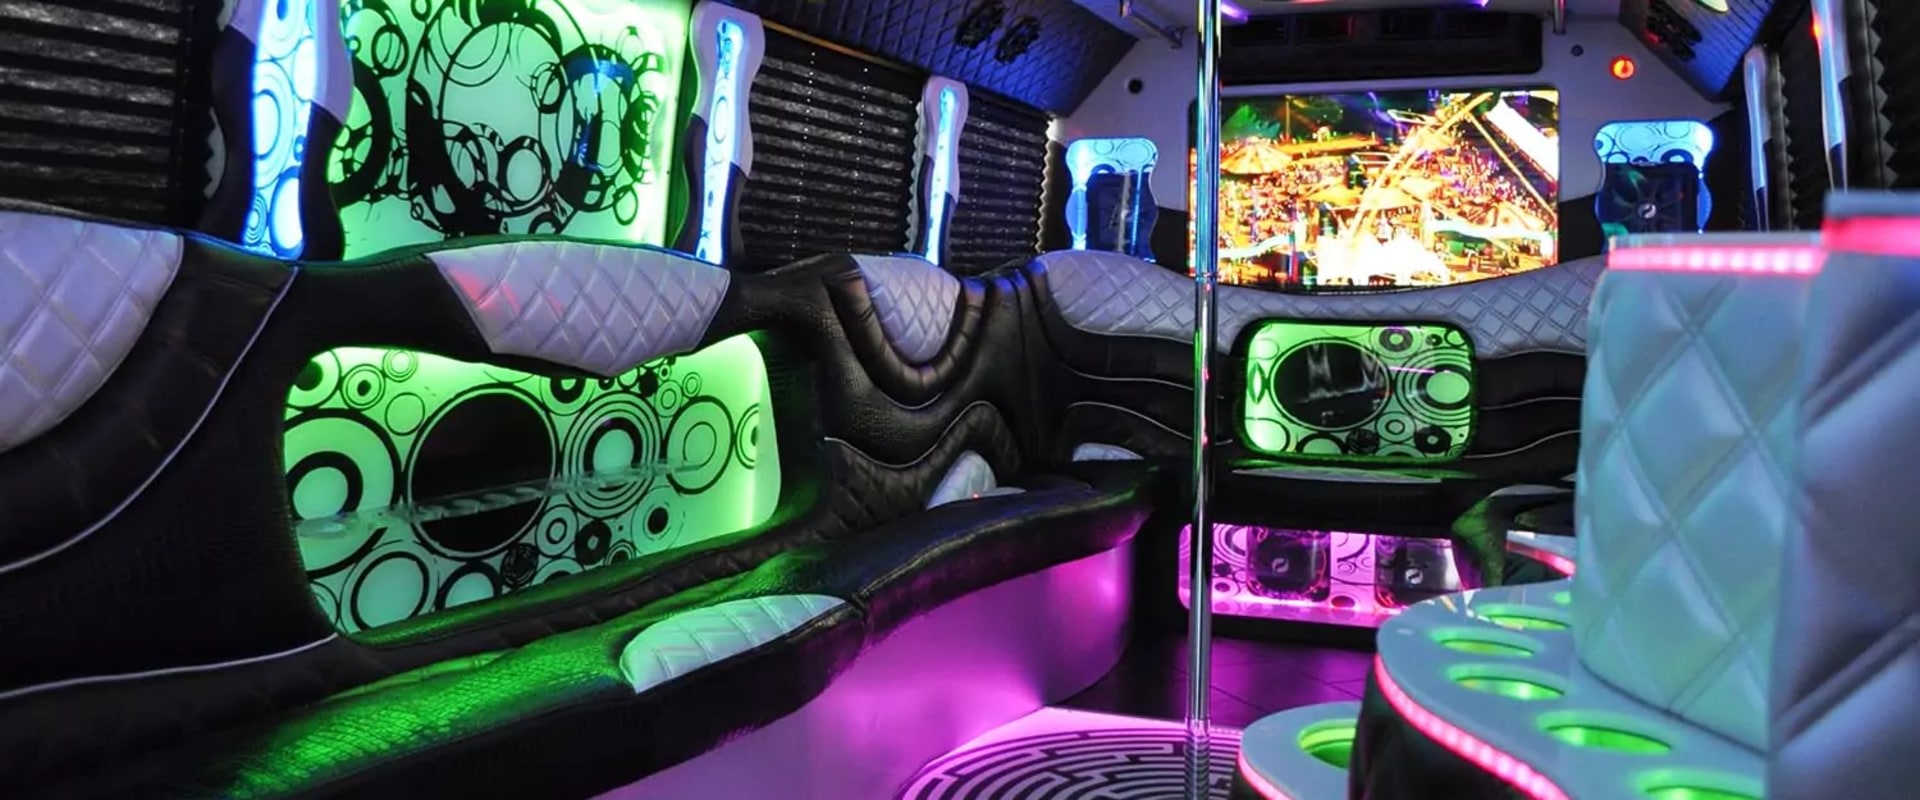 Unforgettable Nights with Uptown Bus Party Buses